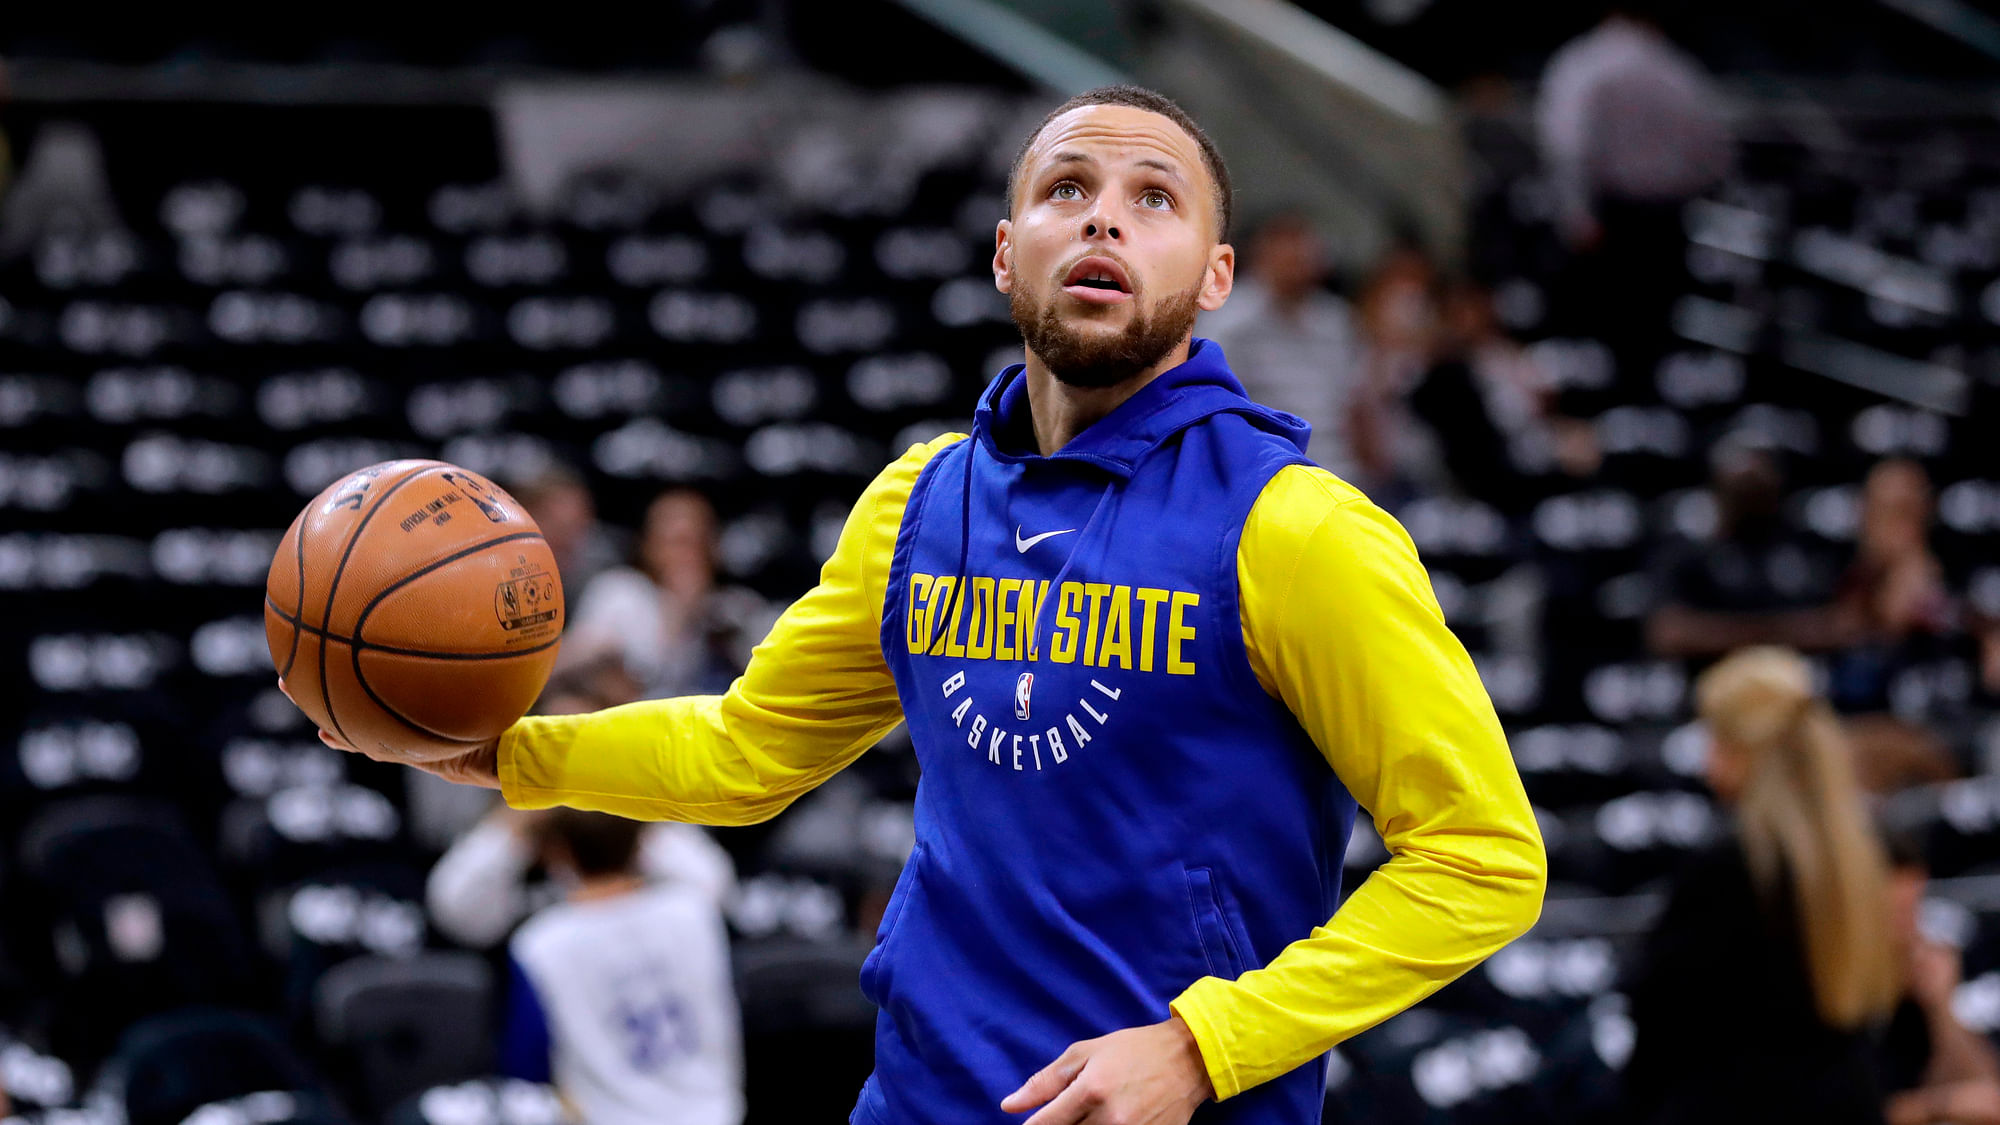 Golden State Warriors guard Stephen Curry (30) during a training session.